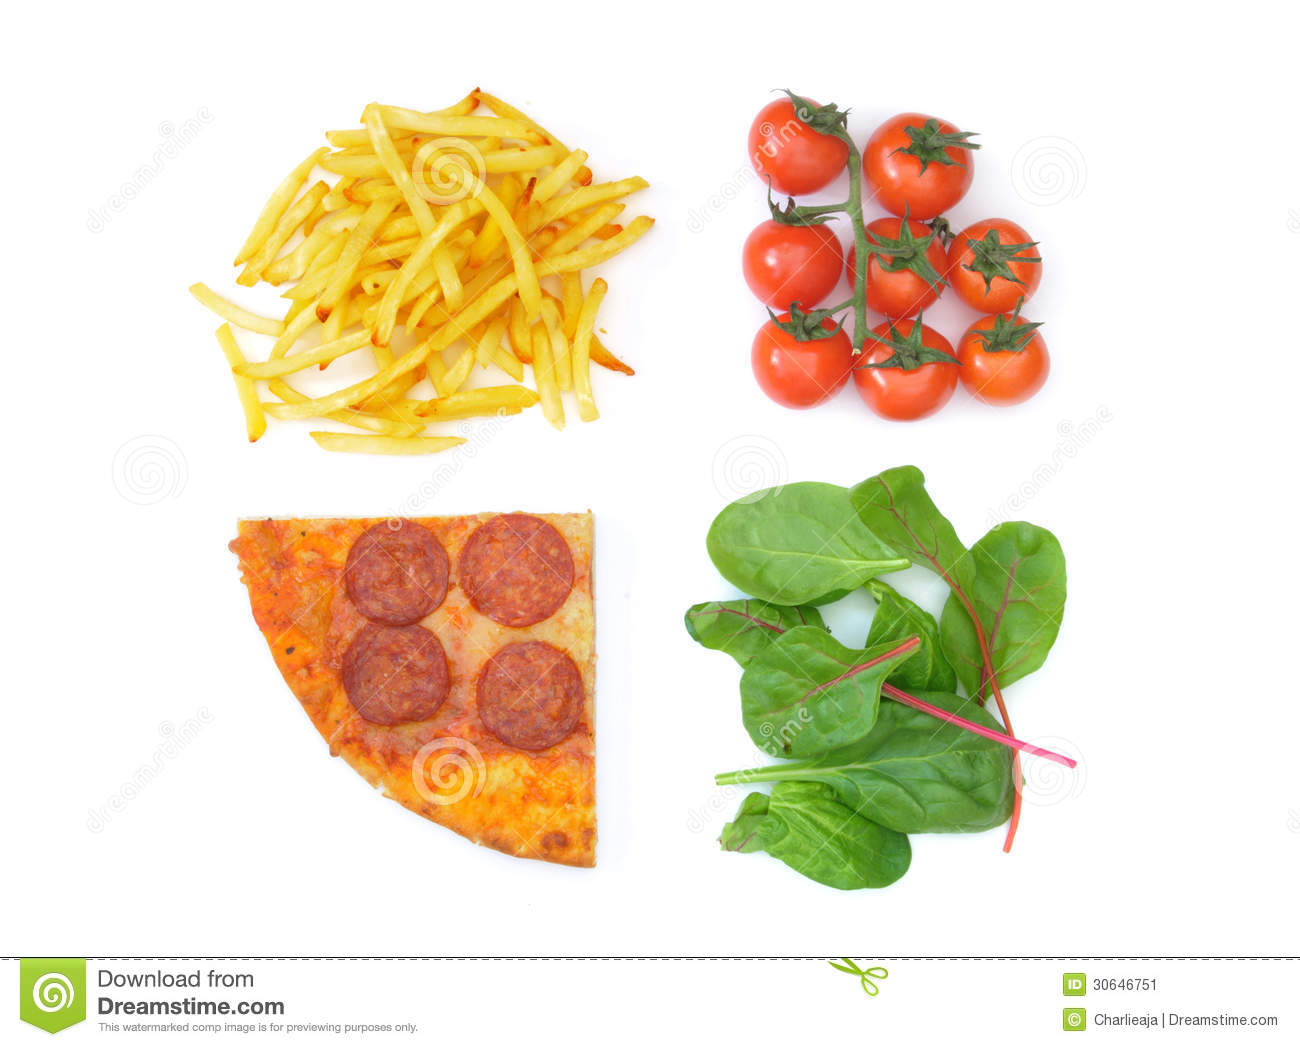 Fast Food Pizza And French Fries On One Side And Cherry Tomatoes And